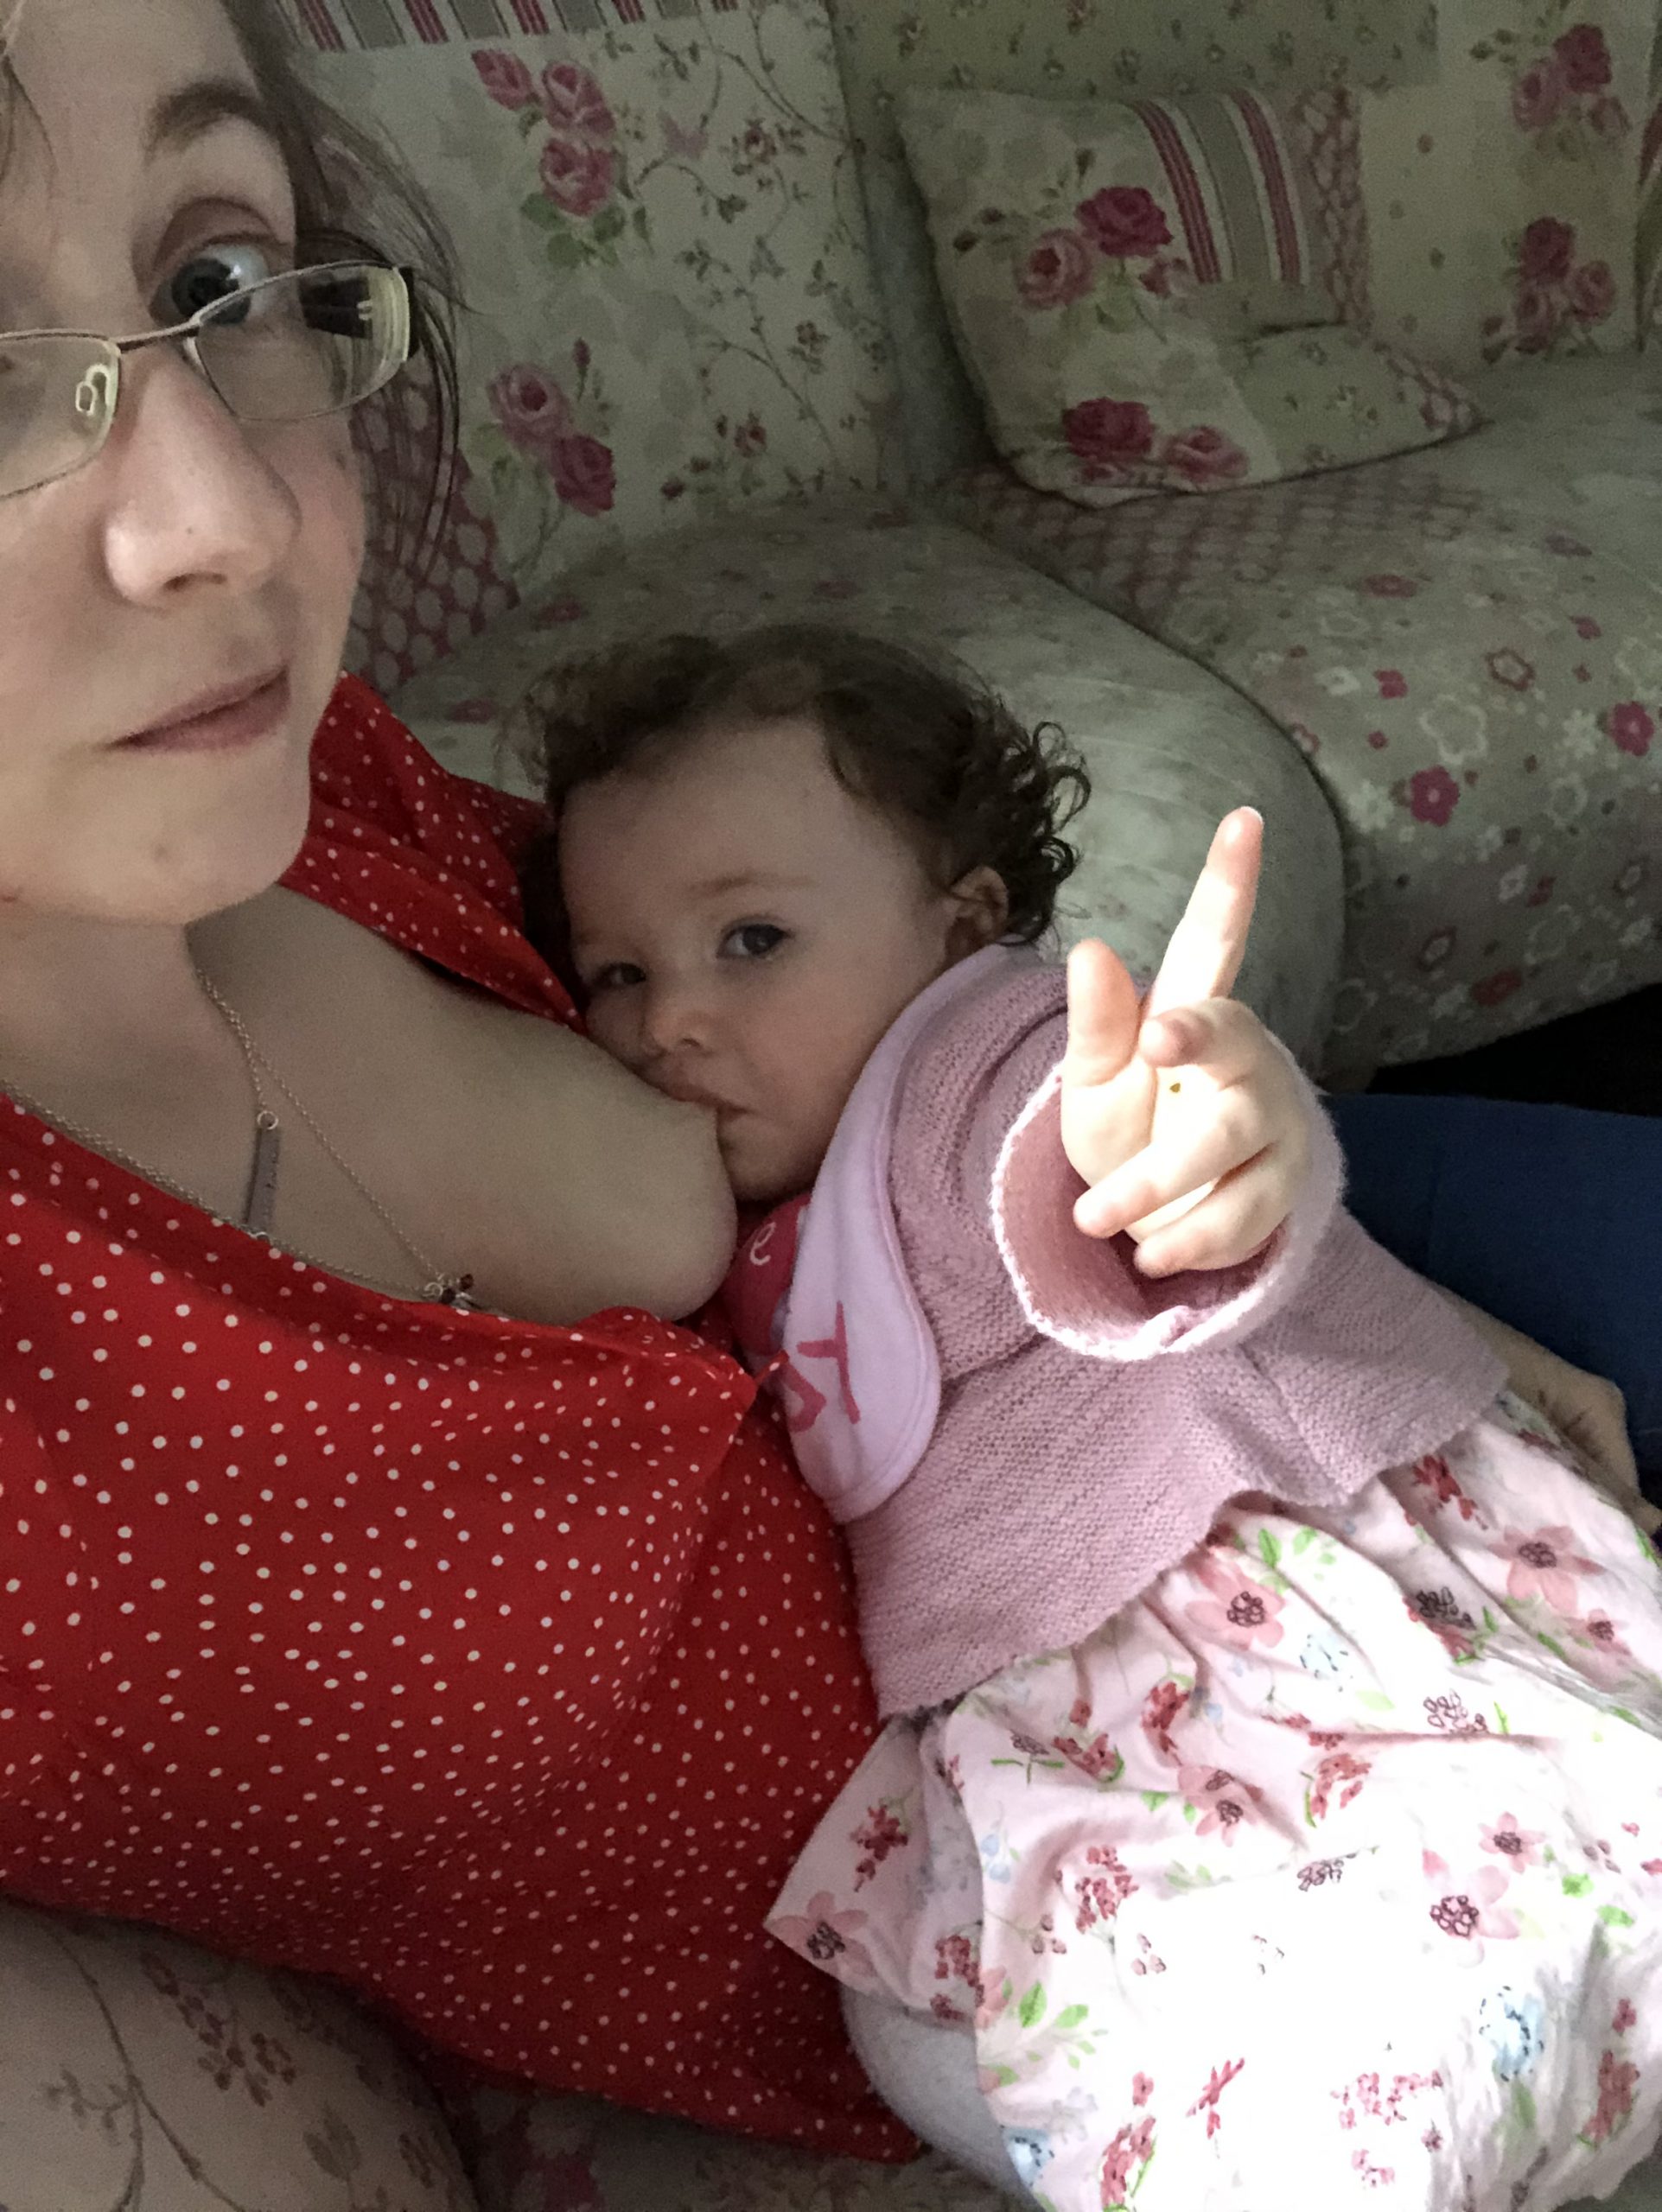 breastfeeding was never part of my plan